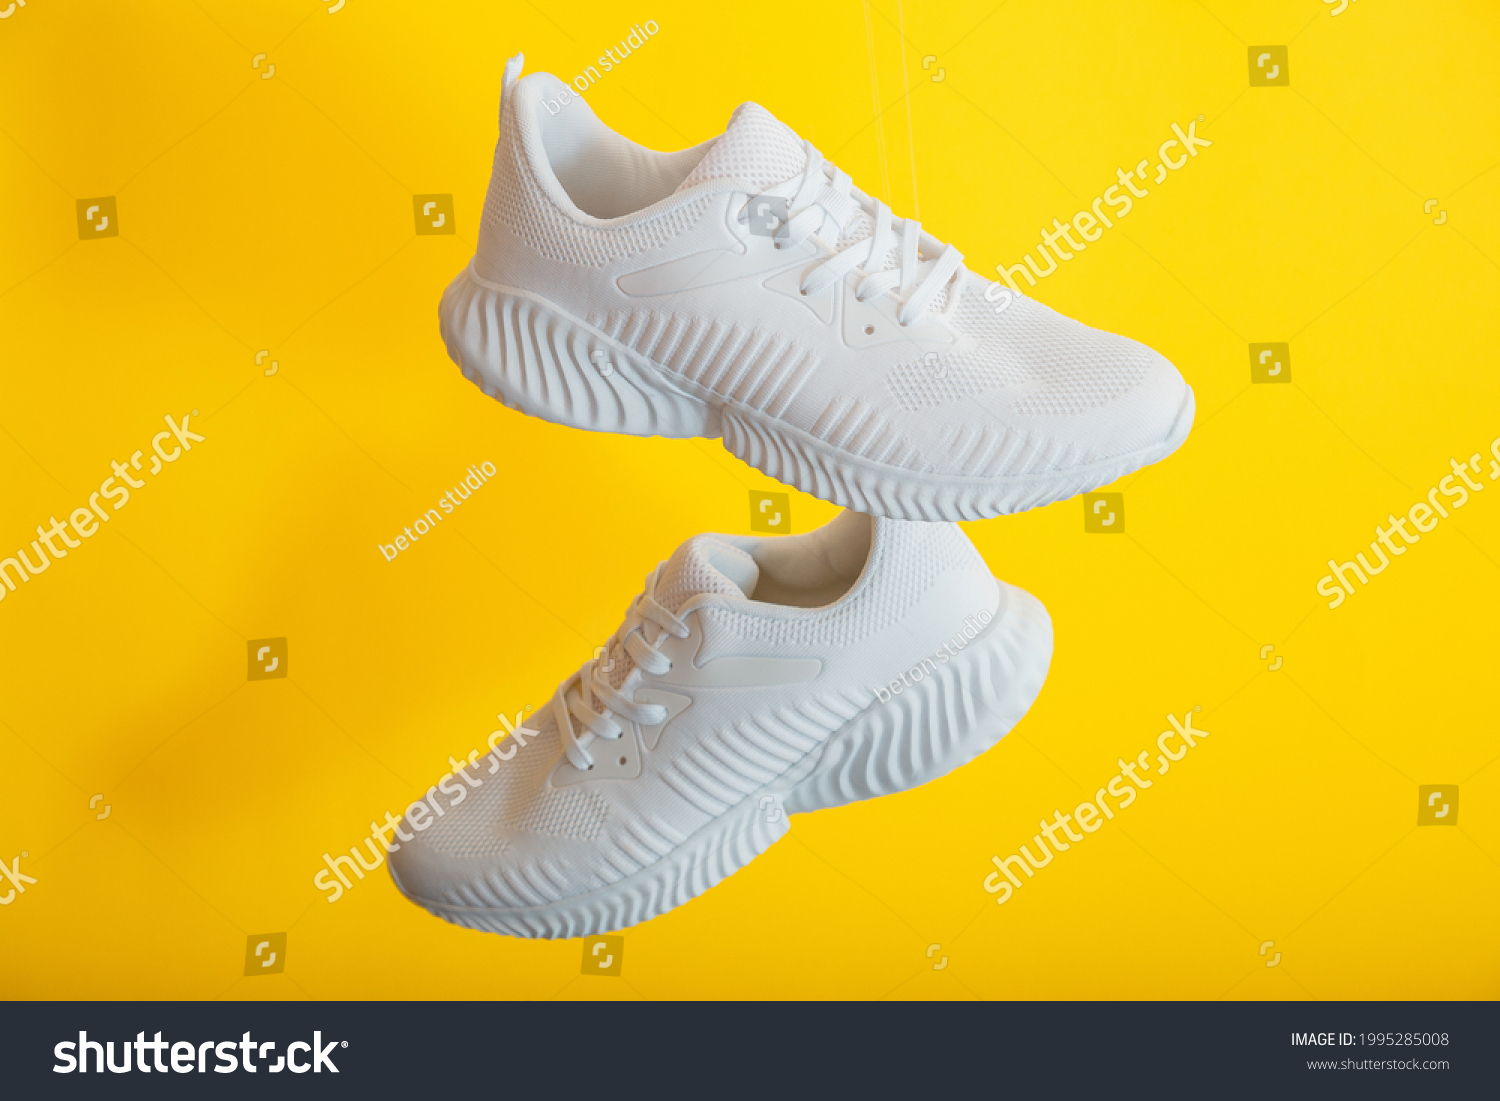 White sneakers shoes fly on yellow color background. Pair of sport male sneakers. Levitation footwear on yellow wall #1995285008